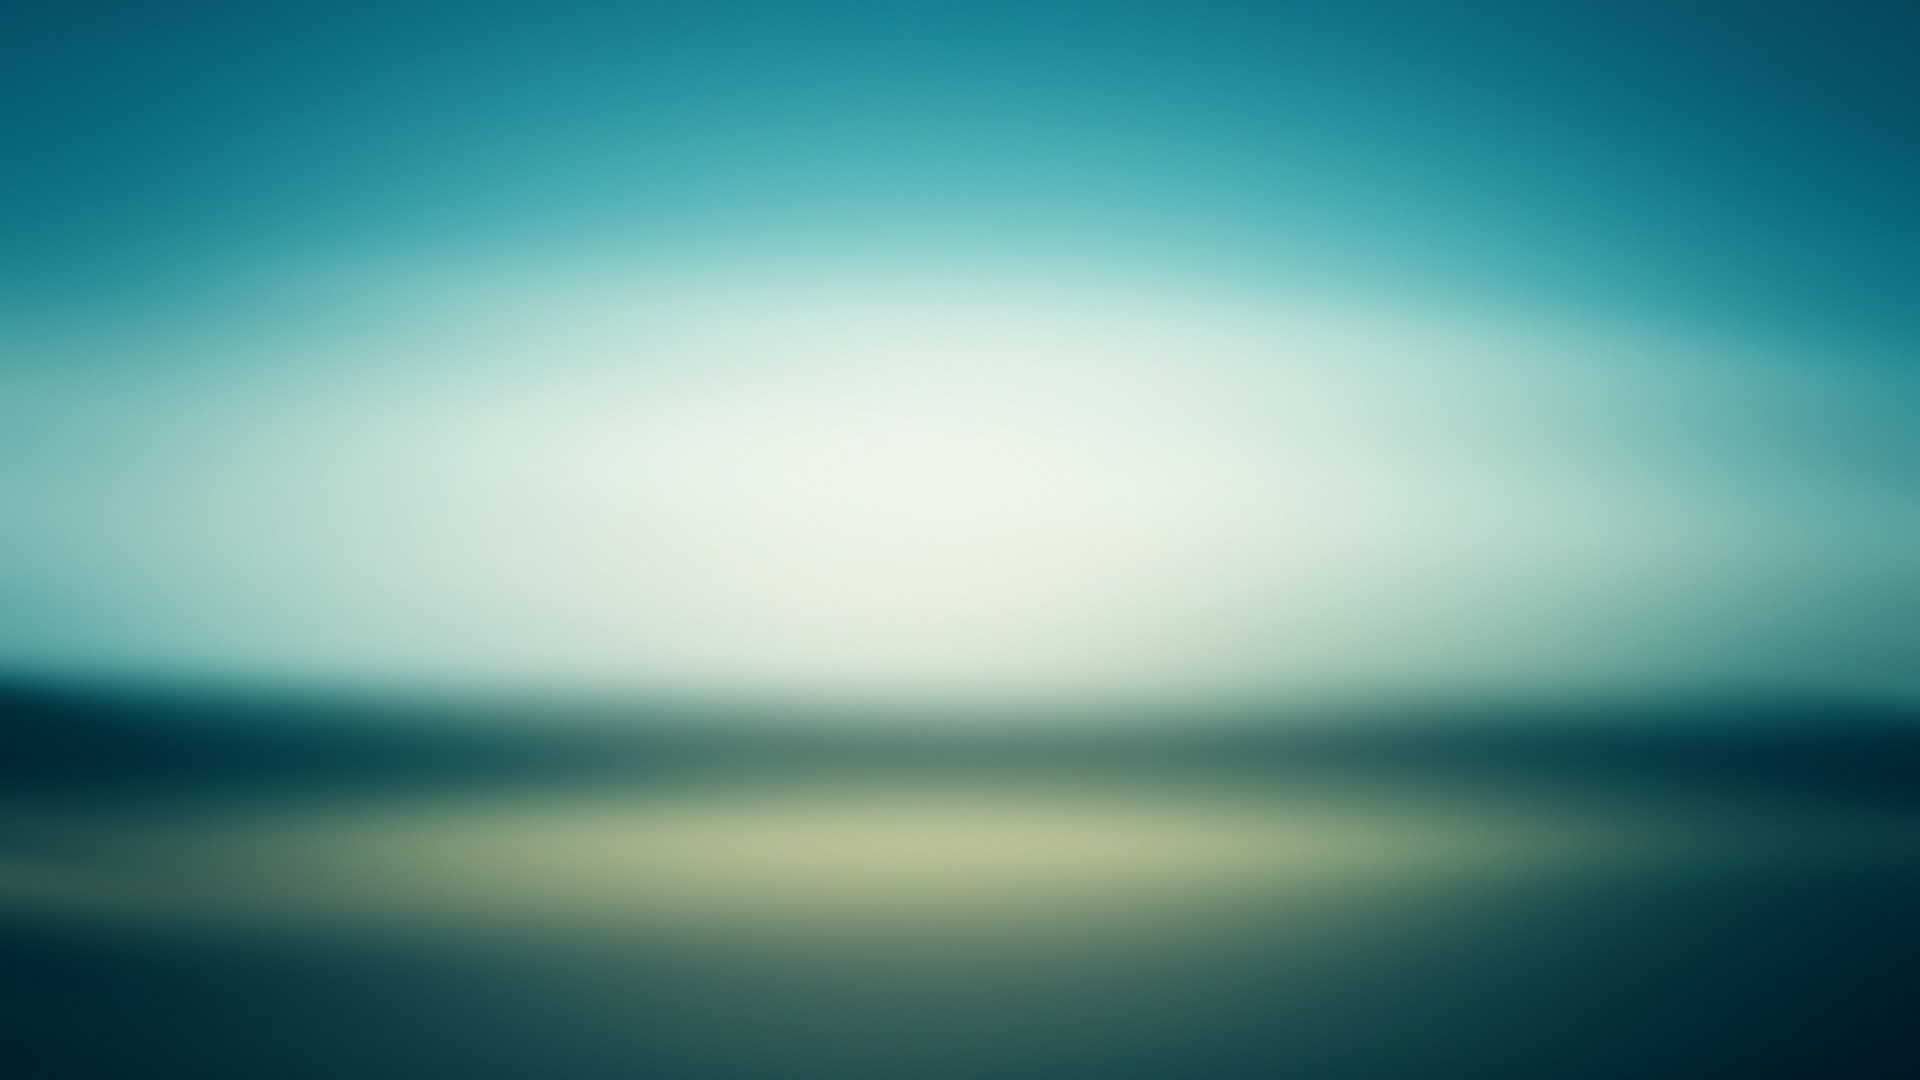 Teal Color Wallpaper For Desktop with resolution 1920X1080 pixel. You can use this wallpaper as background for your desktop Computer Screensavers, Android or iPhone smartphones